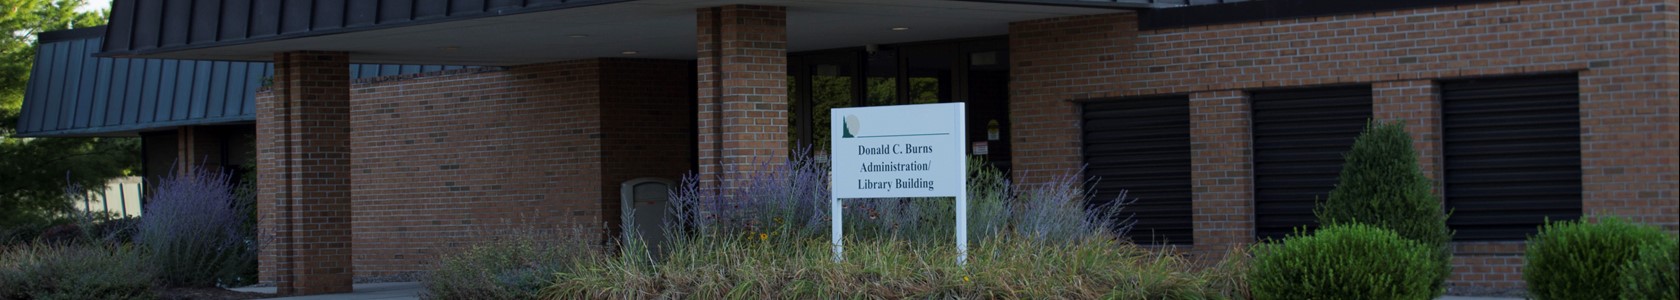 MCC's Sidney campus, Donald C. Burn Administration/Library Building